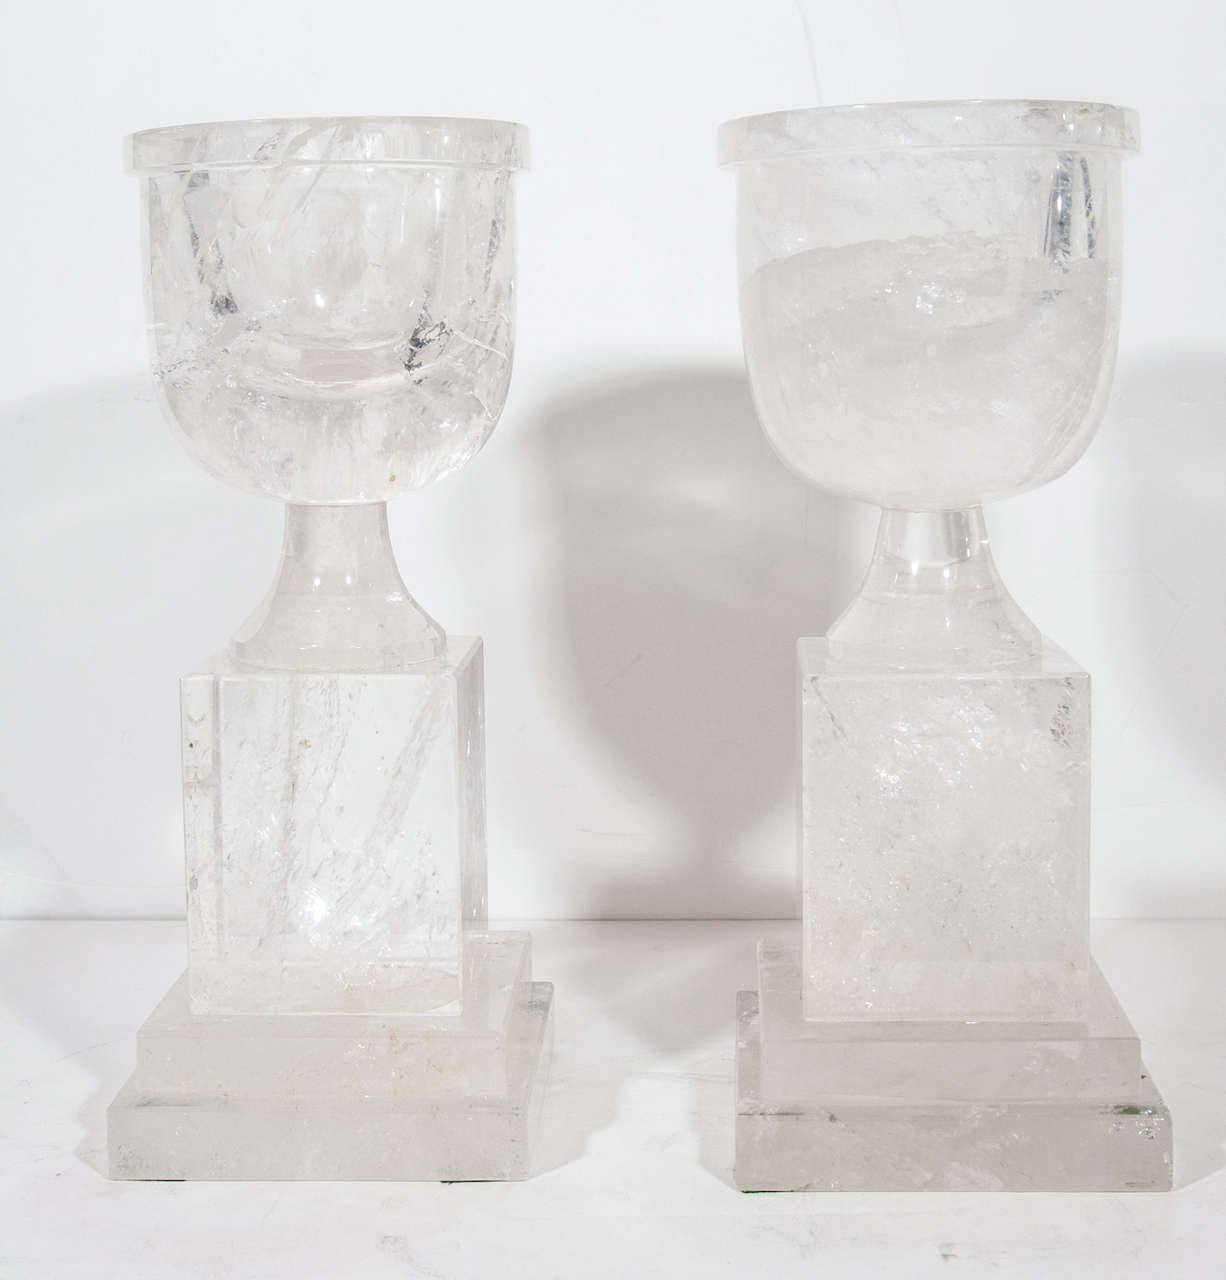 A pair of superb and very unusual Art Deco style cut rock crystal urns of fine quality.